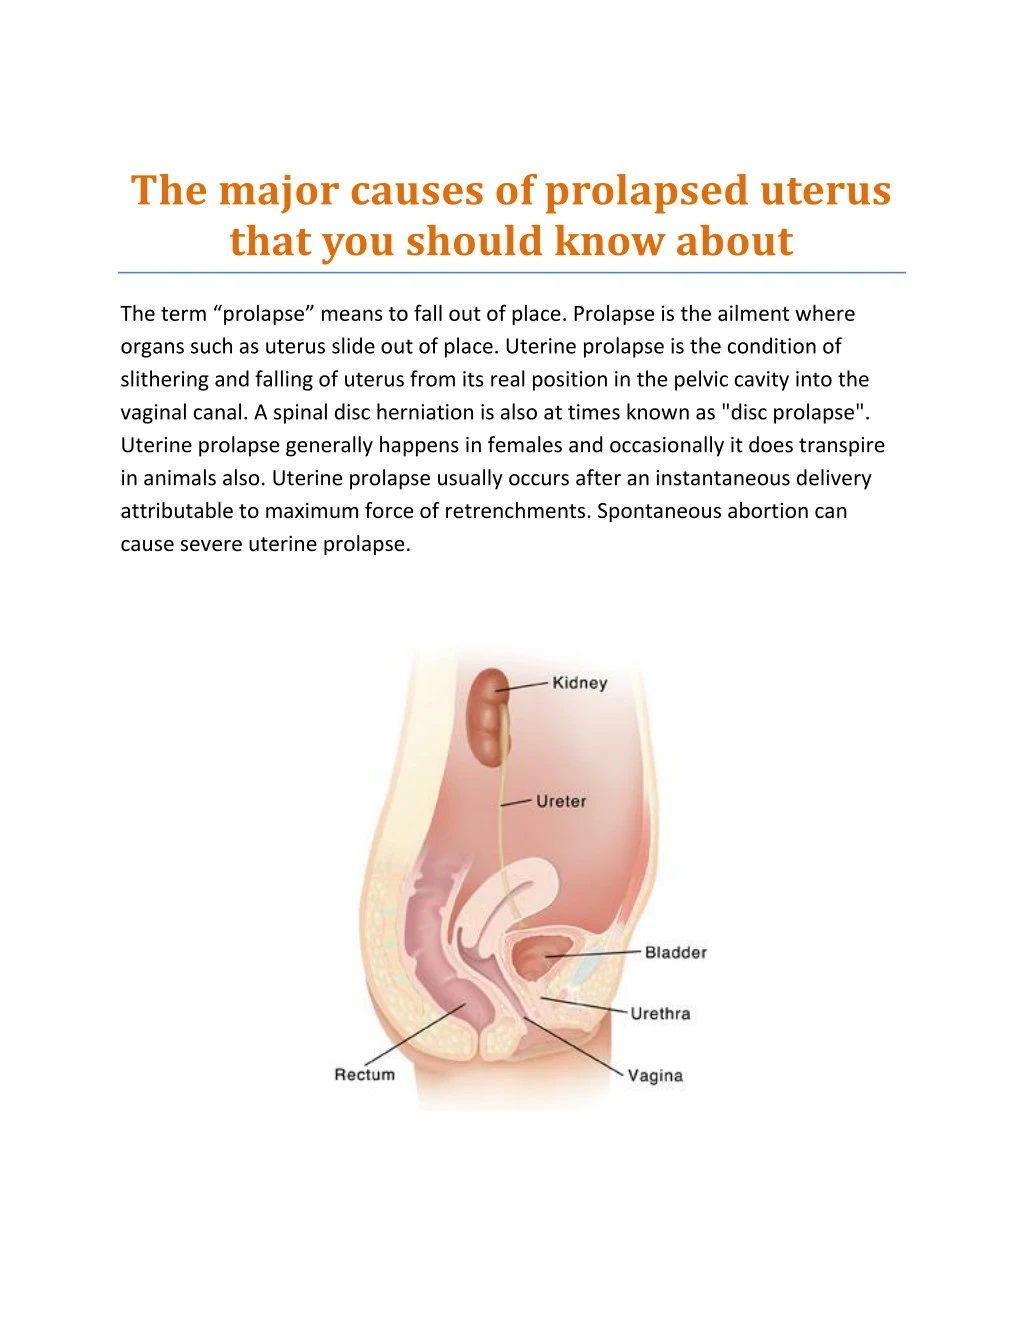 the major causes of prolapsed uterus that